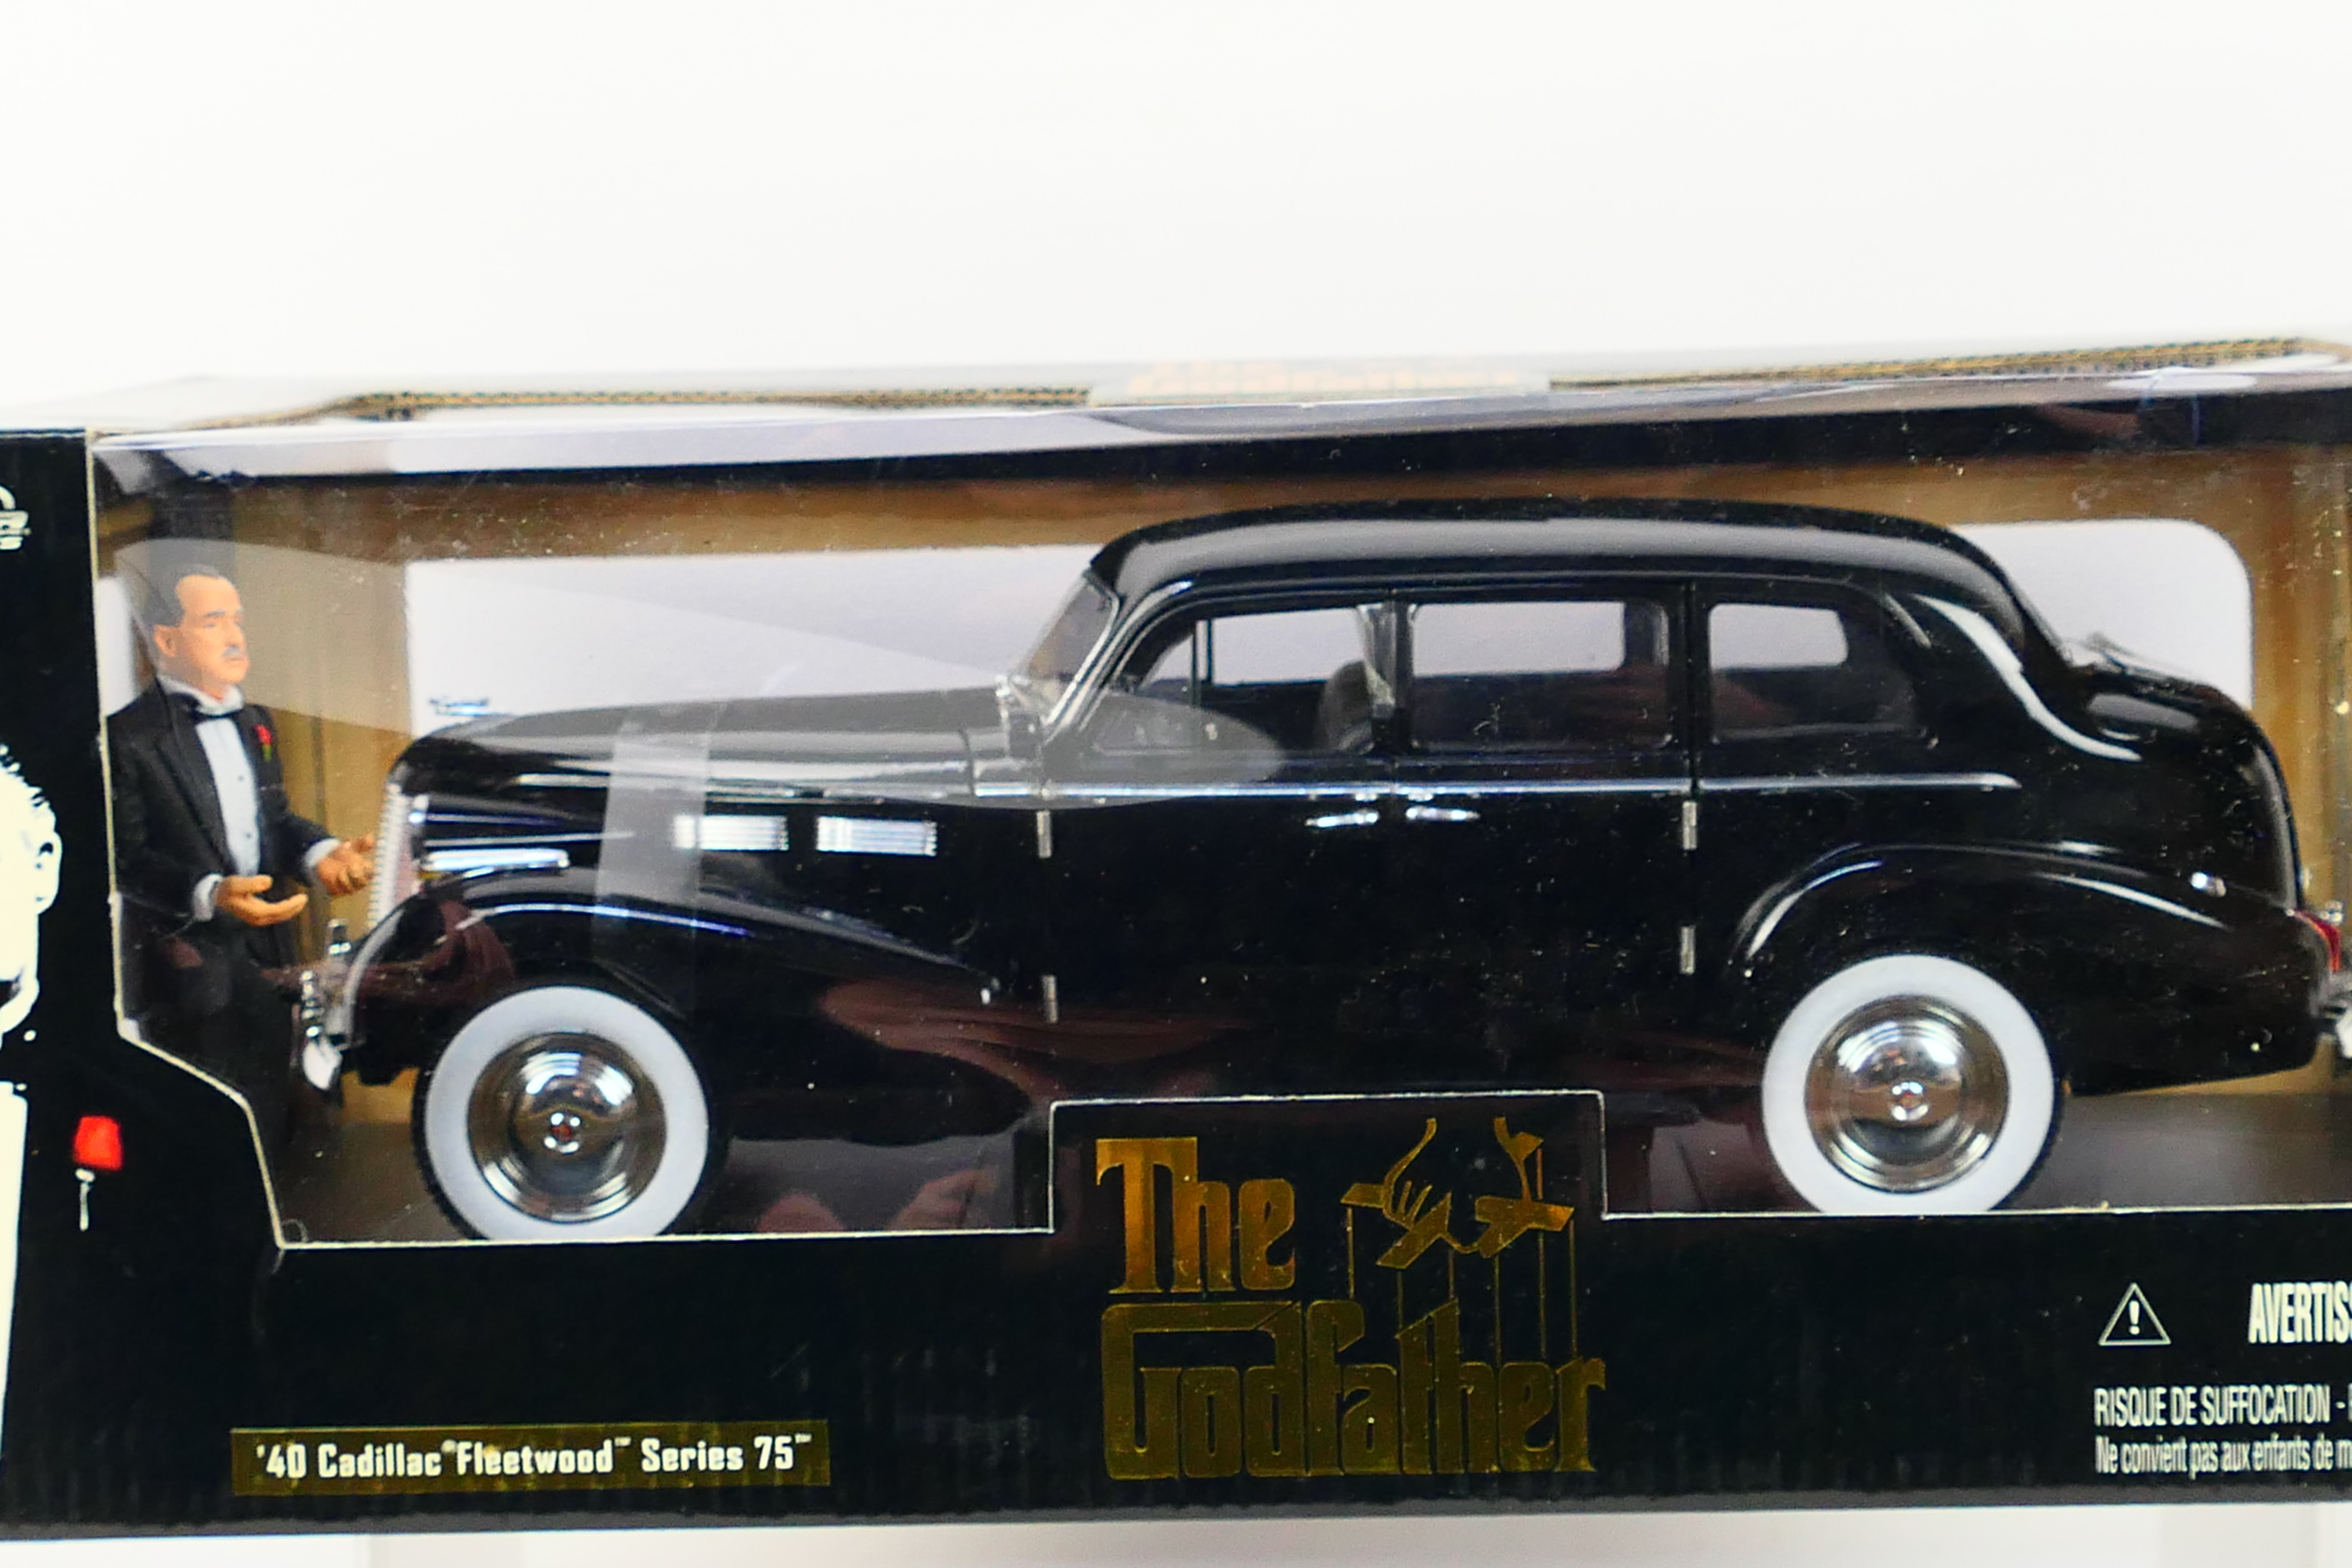 Jada Toys - A boxed 1:18 scale Jada Toys #91670 '40 Cadillac Fleetwood Series 75 from 'The - Image 2 of 7